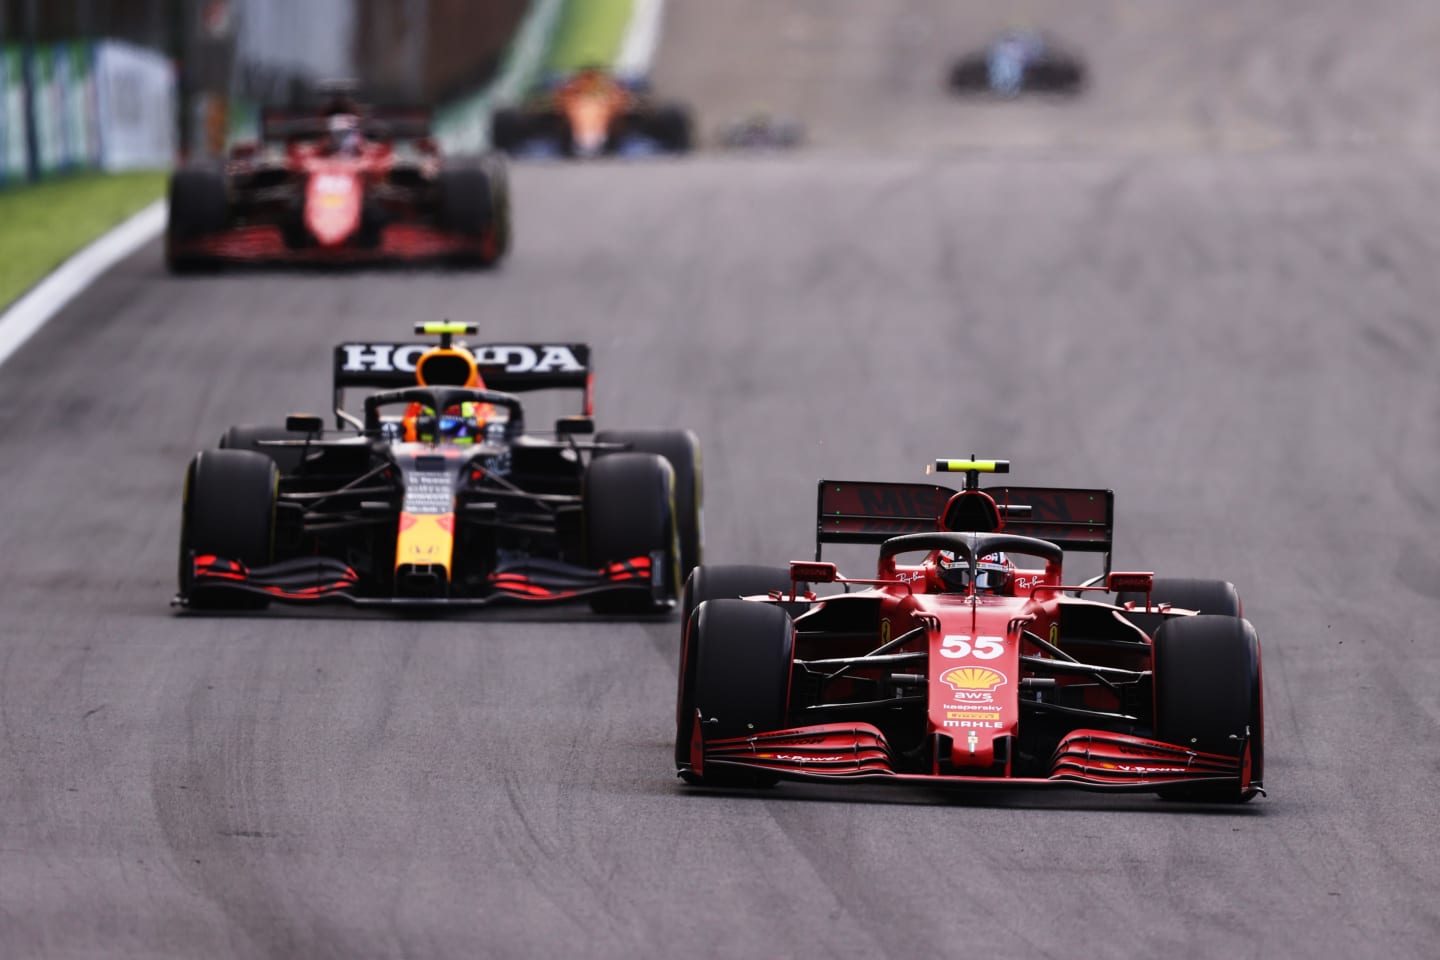 SAO PAULO, BRAZIL - NOVEMBER 13: Carlos Sainz of Spain driving the (55) Scuderia Ferrari SF21 leads Sergio Perez of Mexico driving the (11) Red Bull Racing RB16B Honda during the sprint ahead of the F1 Grand Prix of Brazil at Autodromo Jose Carlos Pace on November 13, 2021 in Sao Paulo, Brazil. (Photo by Lars Baron/Getty Images)